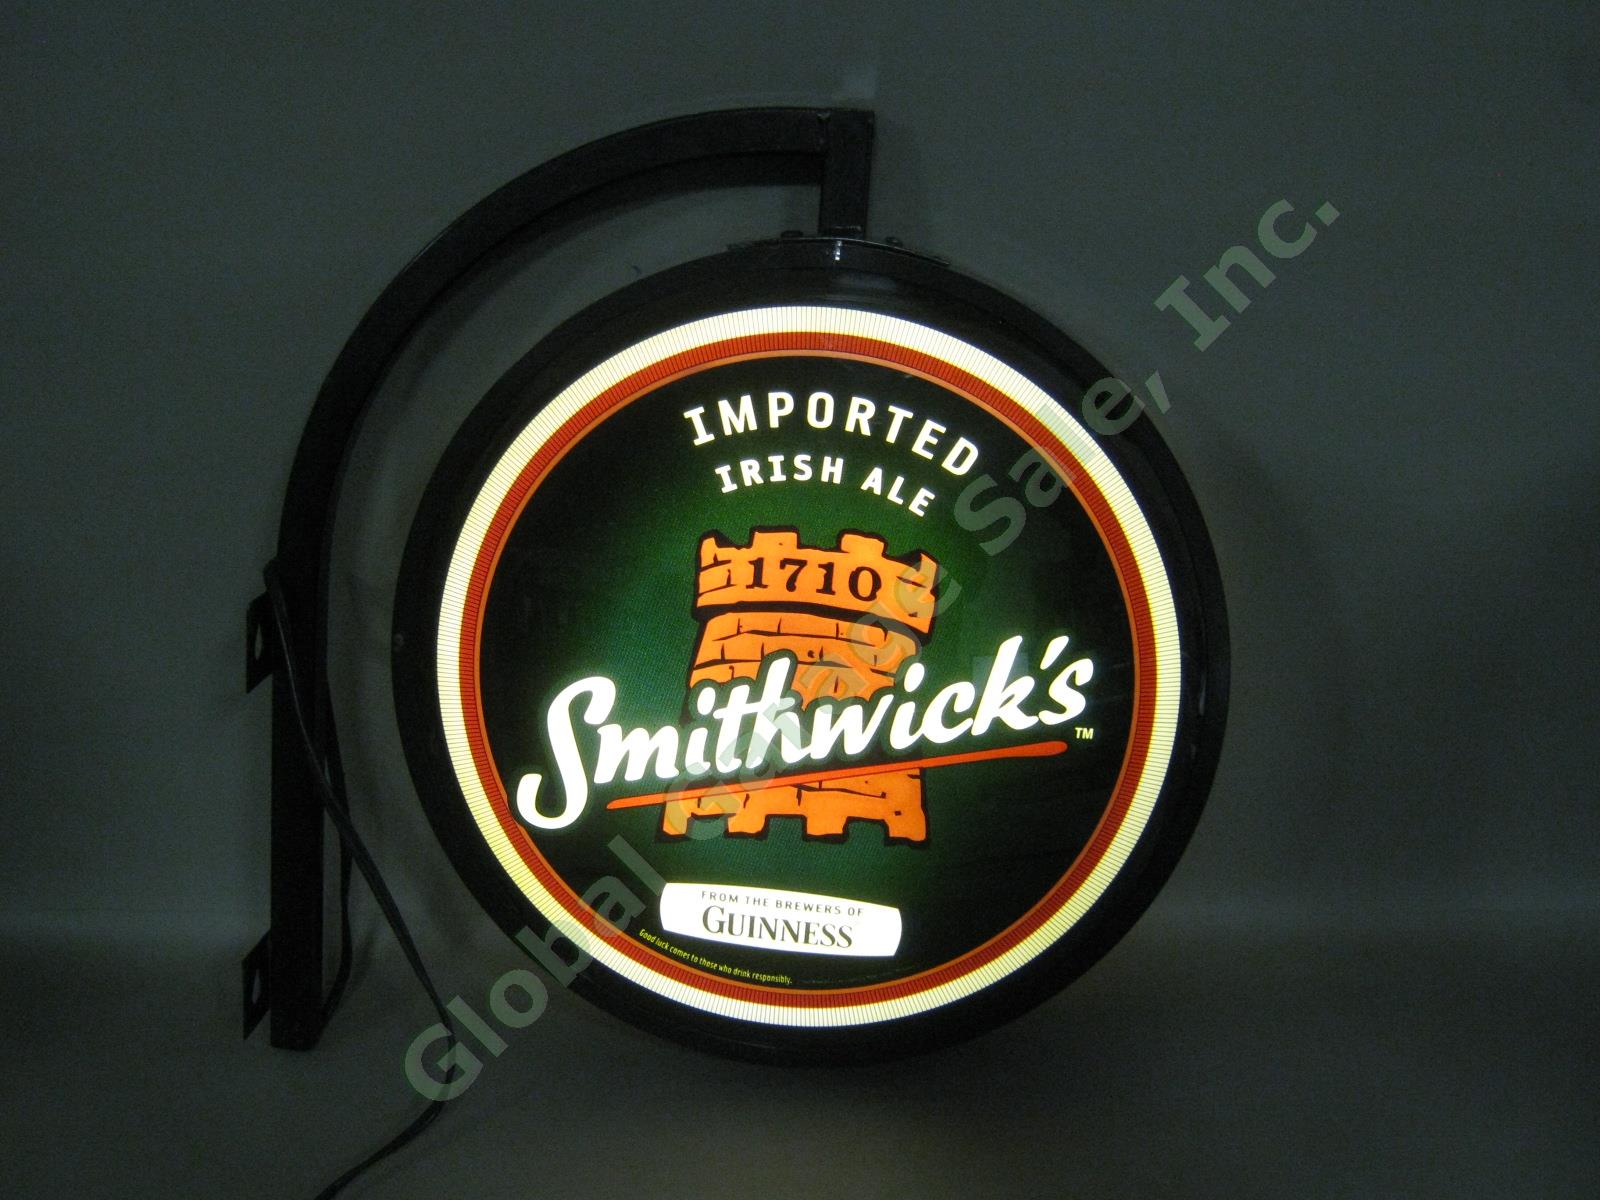 Smithwicks Imported Irish Ale 2 Sided Light Sign Pub Bar Man Cave Guinness Beer 2